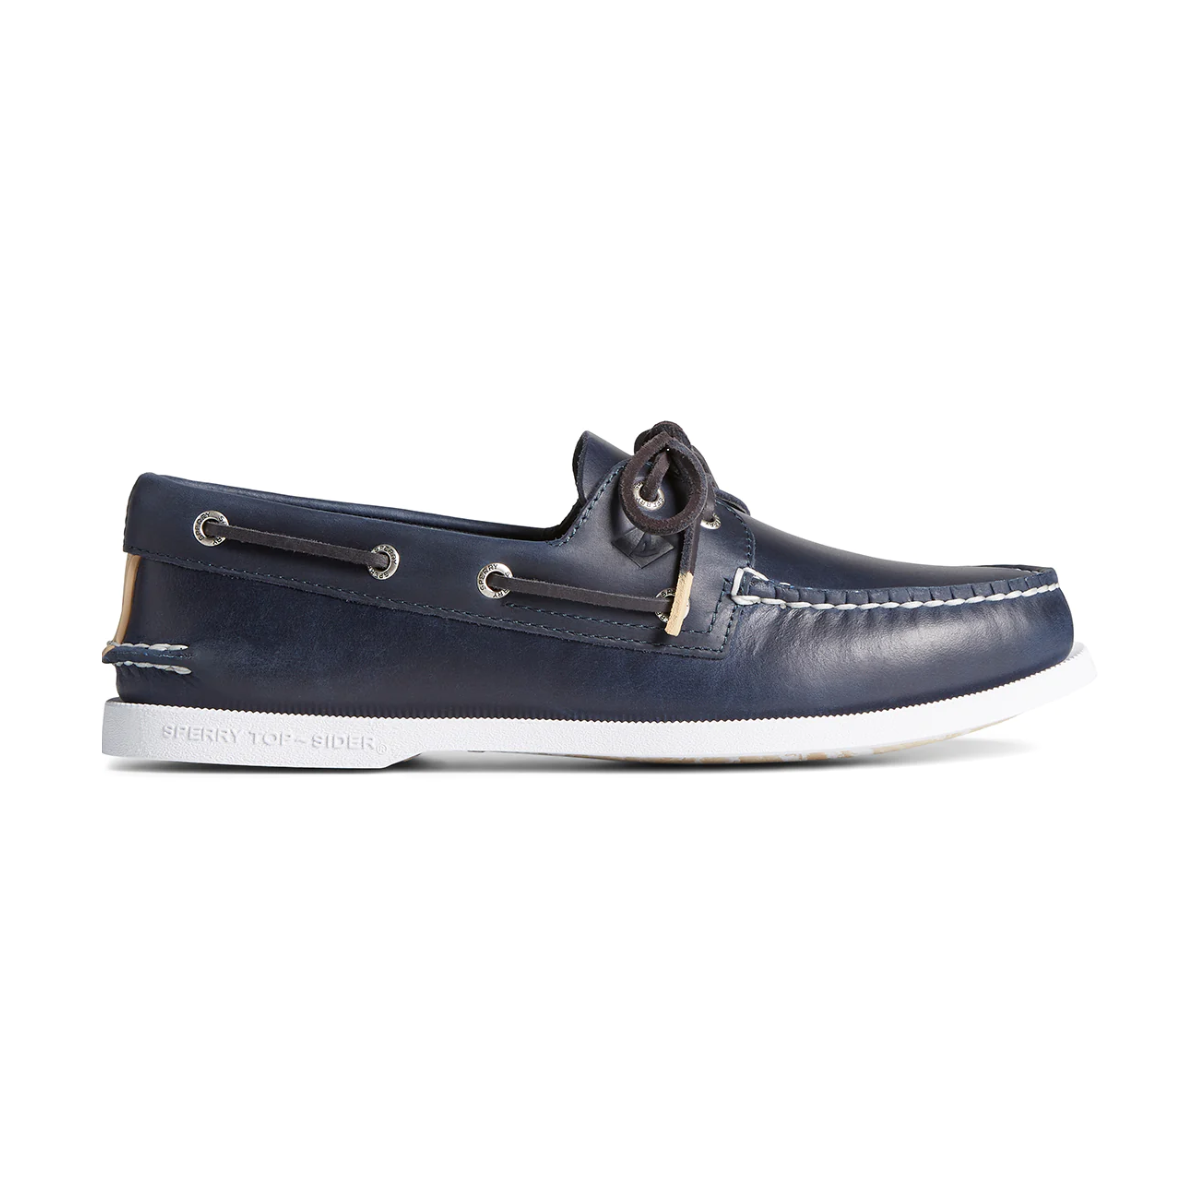 Sperry Authentic Original 2-Eye Pull Up Leather Boat Shoe